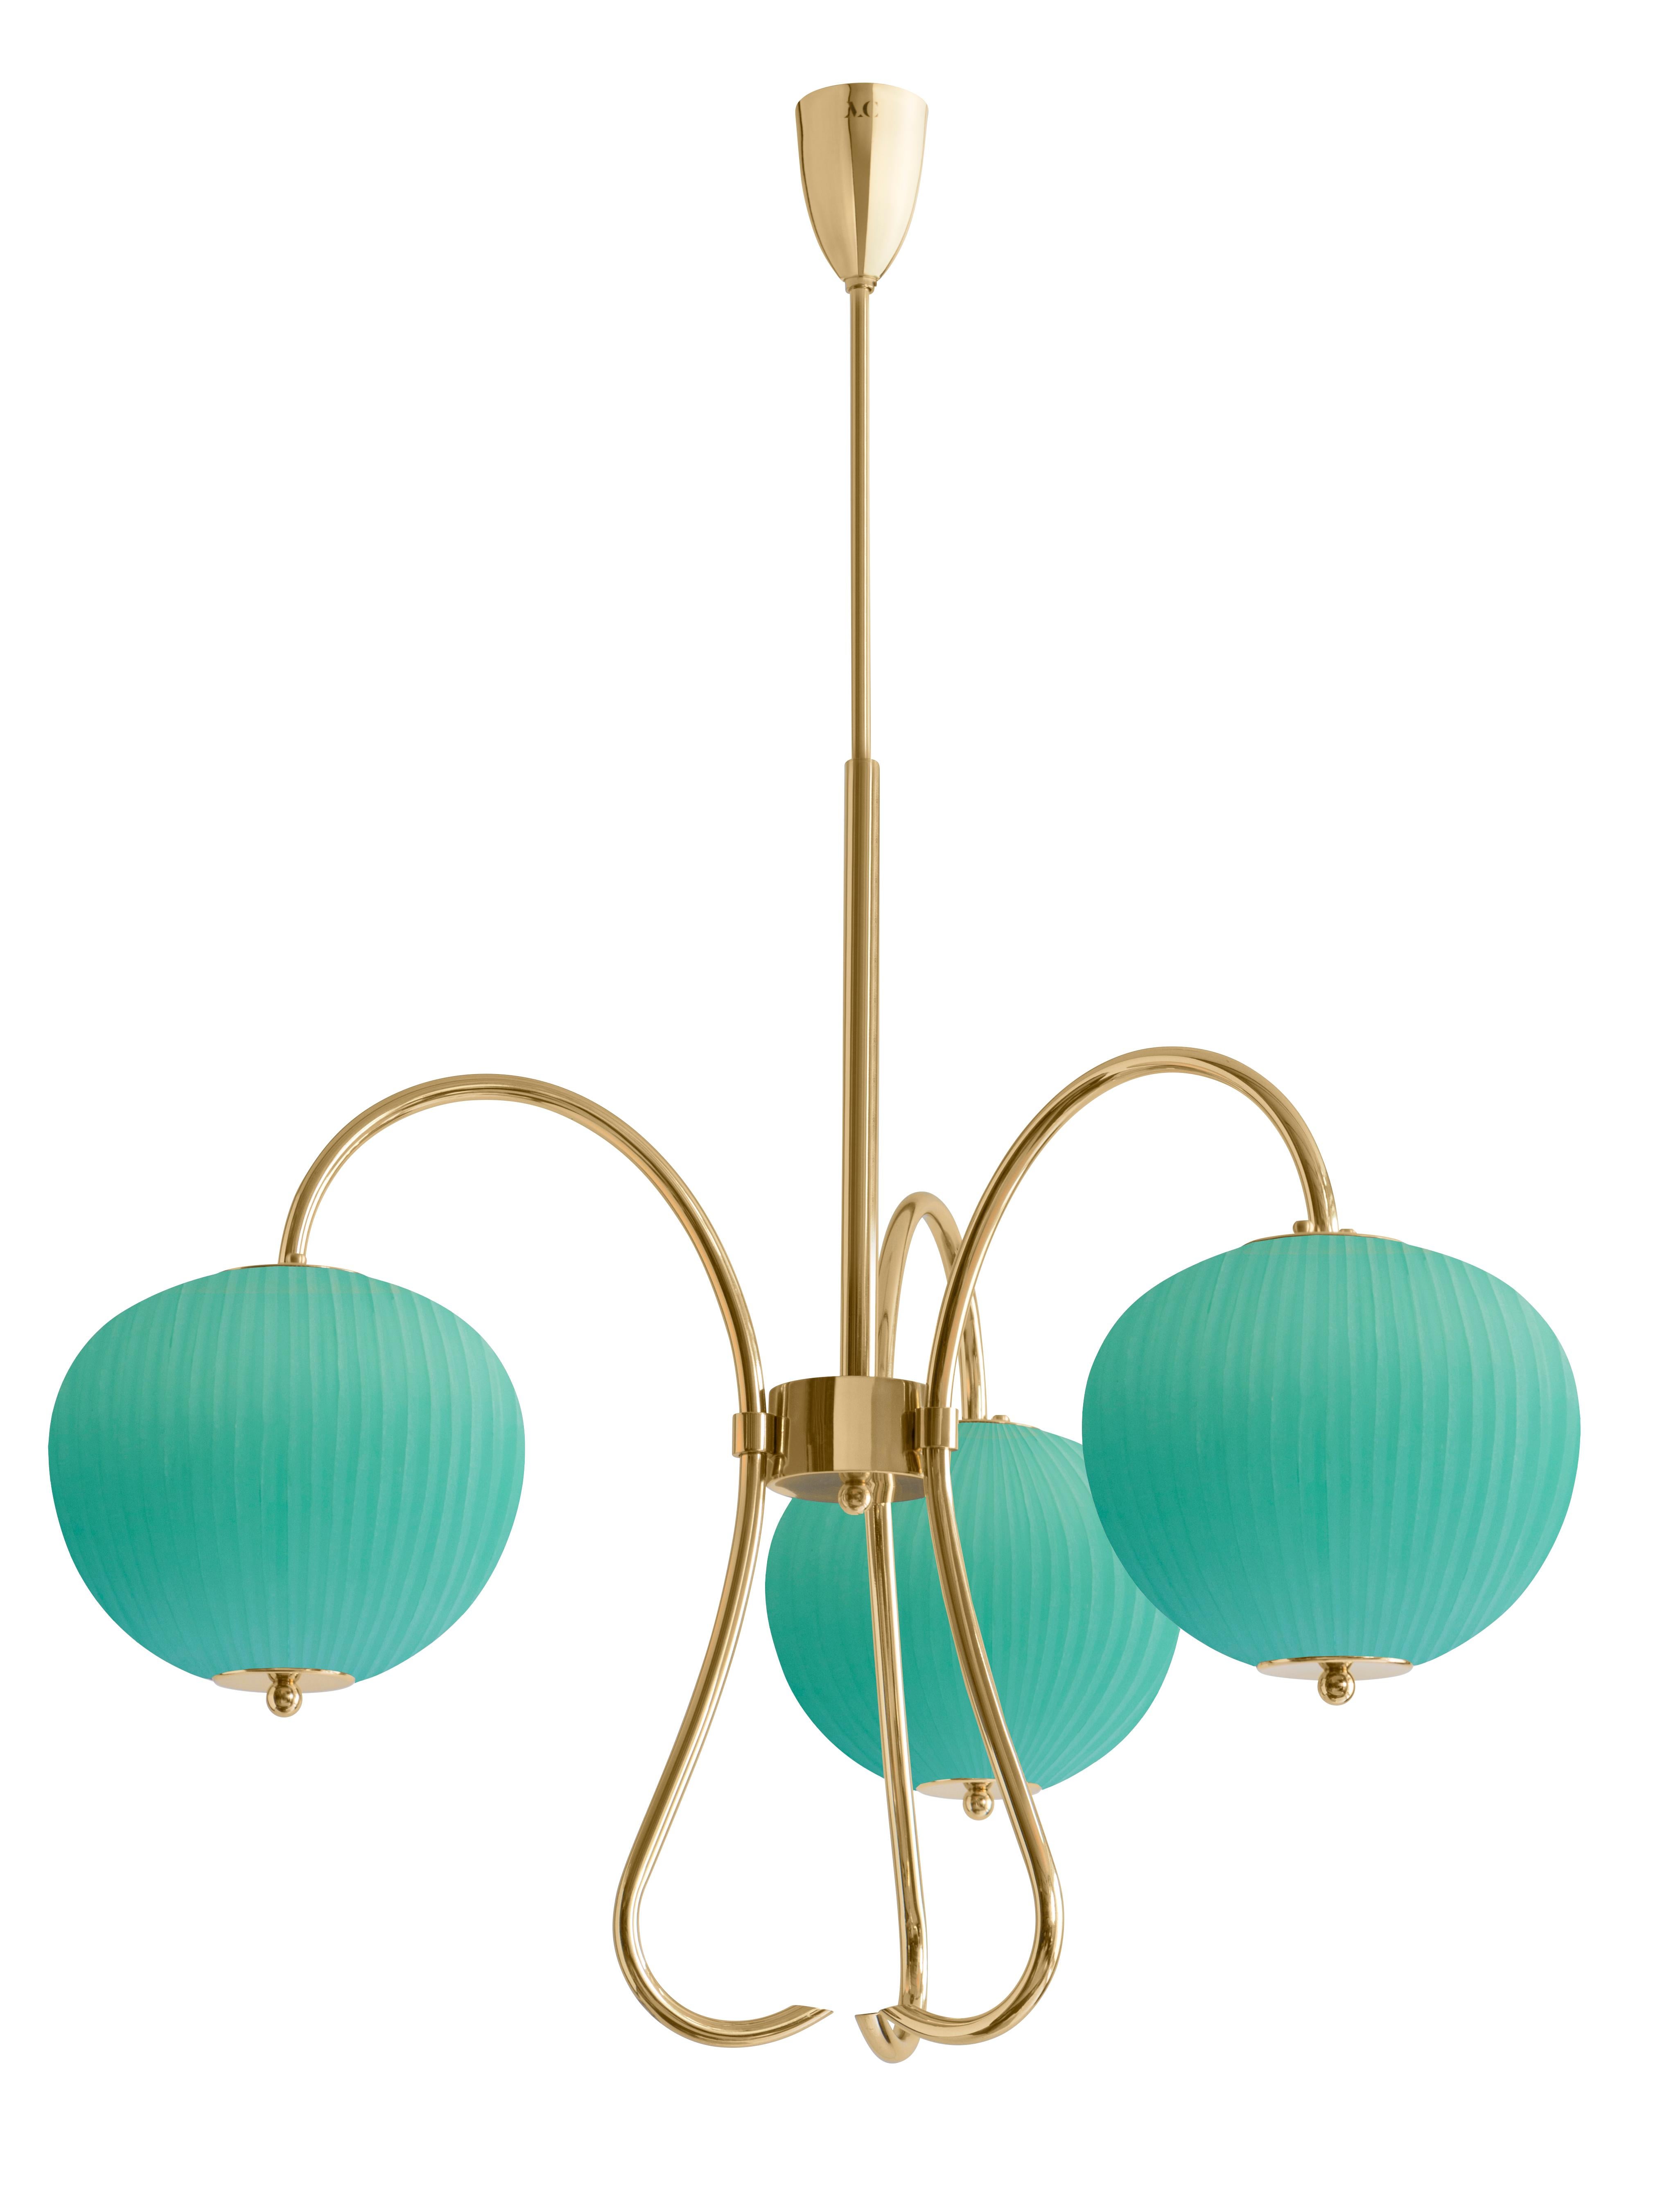 Triple chandelier China 03 by Magic Circus Editions
Dimensions: H 120 x W 81.5 x D 26.2 cm
Materials: Brass, mouth blown glass sculpted with a diamond saw
Colour: jade green

Available finishes: Brass, nickel
Available colours: enamel soft